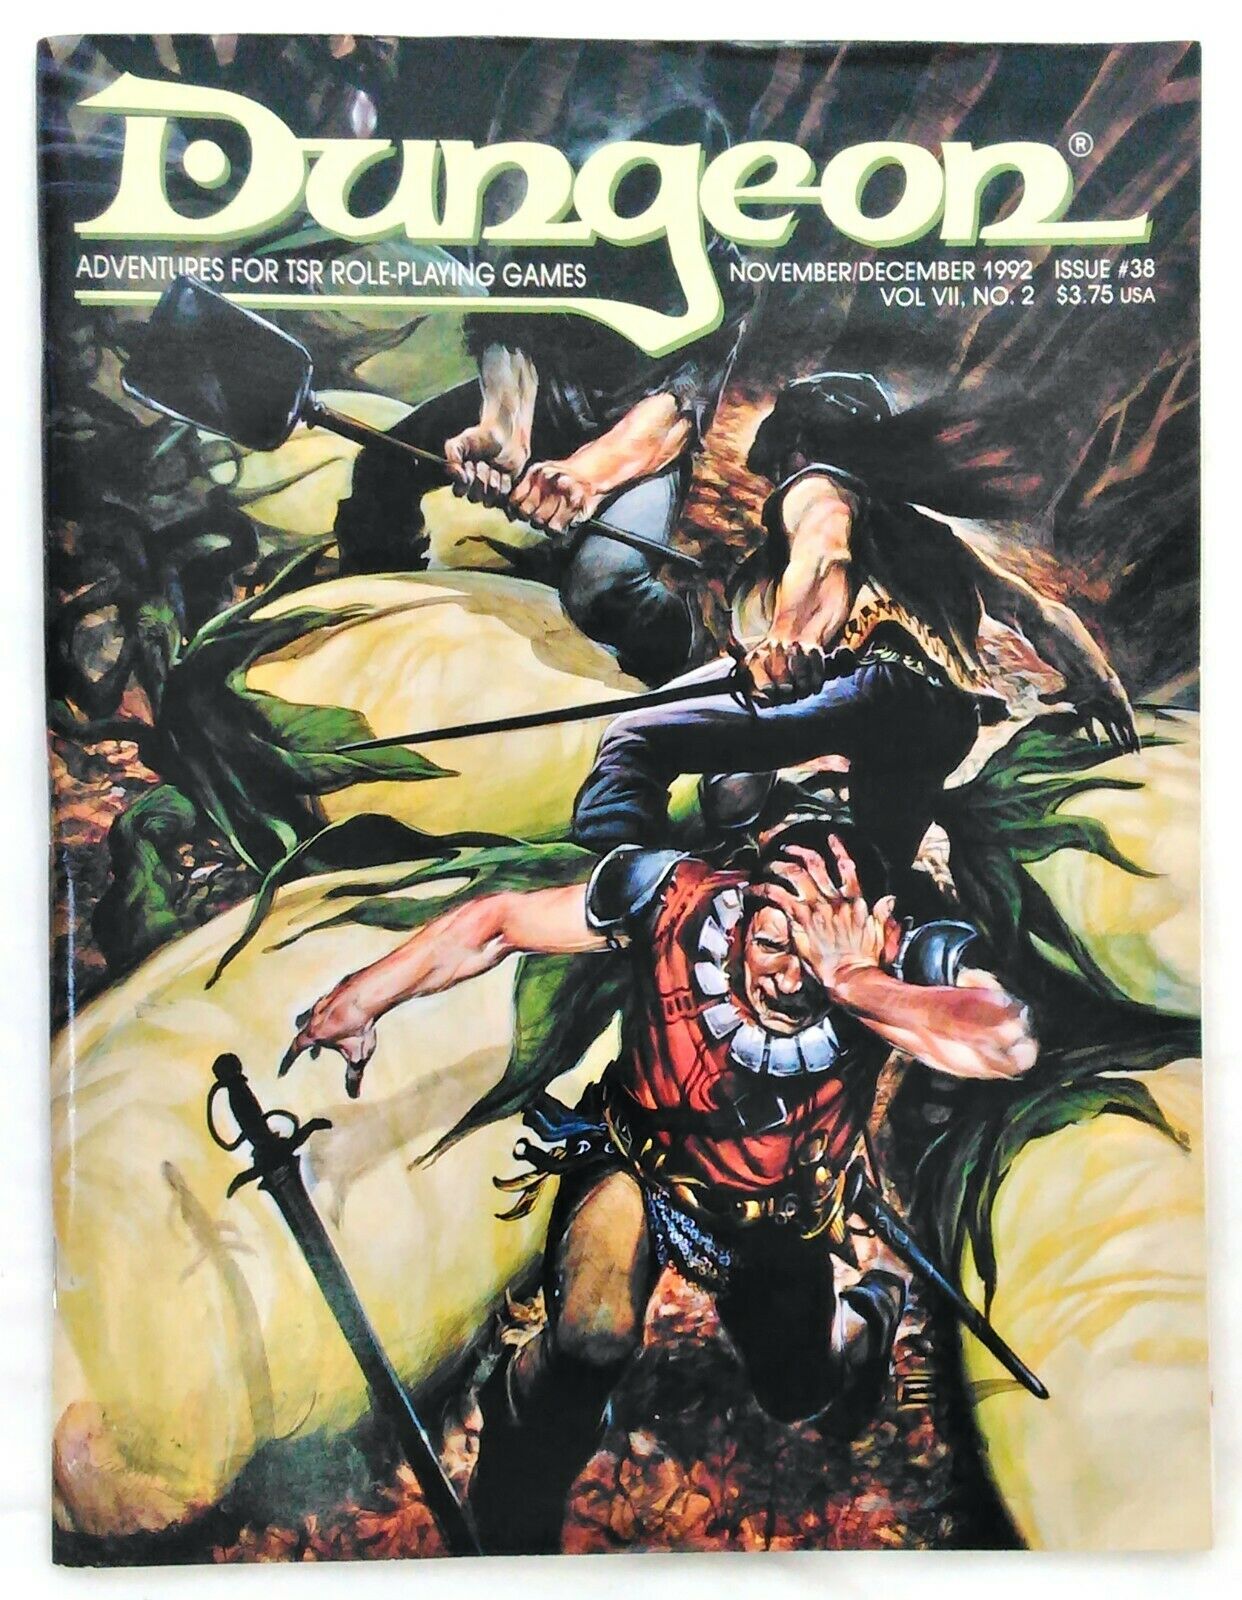 Dungeon Magazine Adventures For Tsr Role-playing Games #38 Nov/dec 92 Vol Vii #2